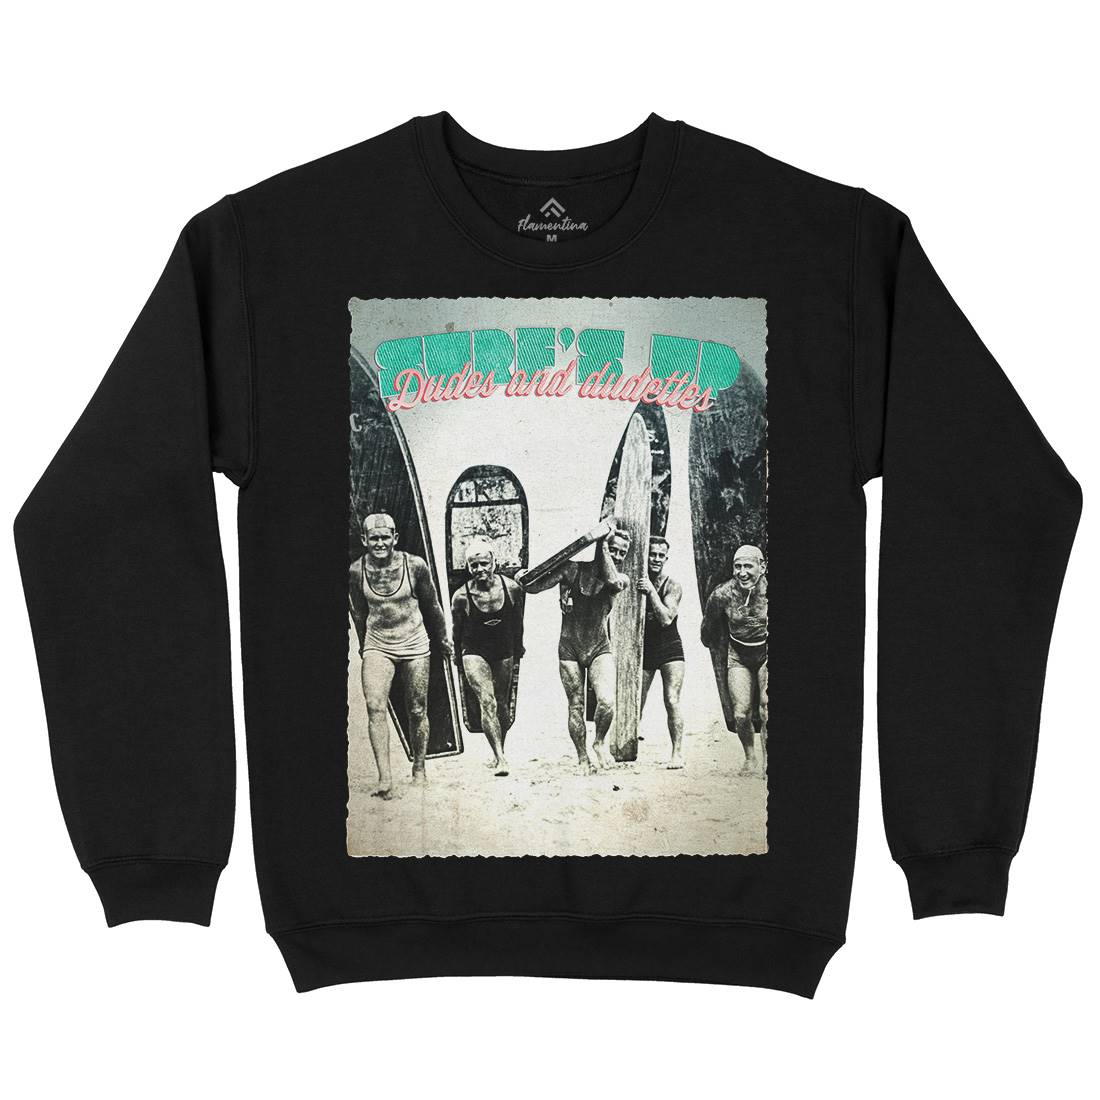 In The Usa Mens Crew Neck Sweatshirt Surf A917